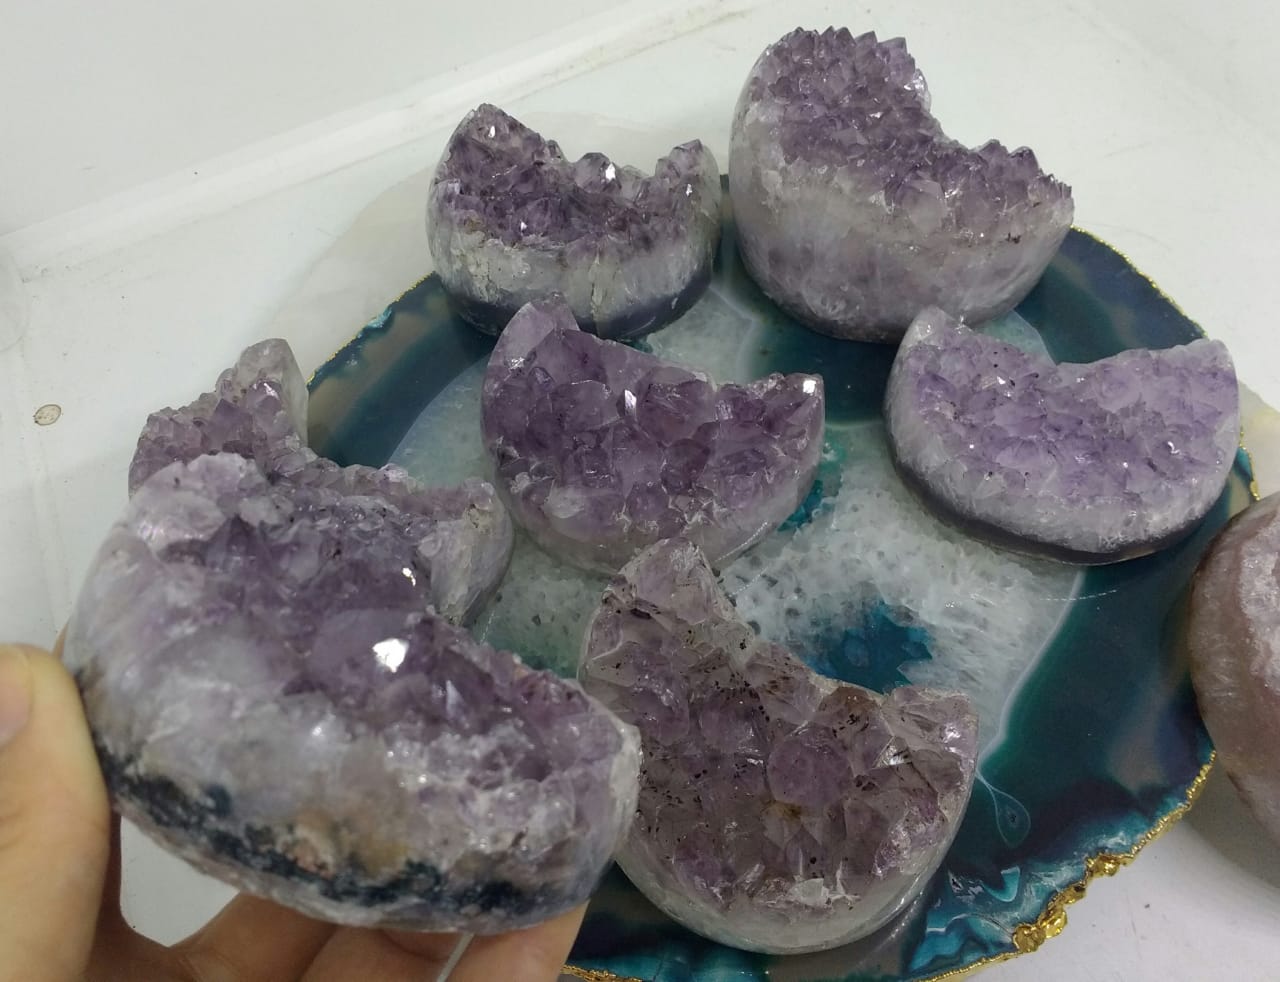 Stones from Uruguay - Polished Amethyst Cluster Moon Crecent for Decoration, Meditation, Spiritual Work - Polished Amethyst Cluster Half Moon  for Reiki Grids, Decoration and Concentration.